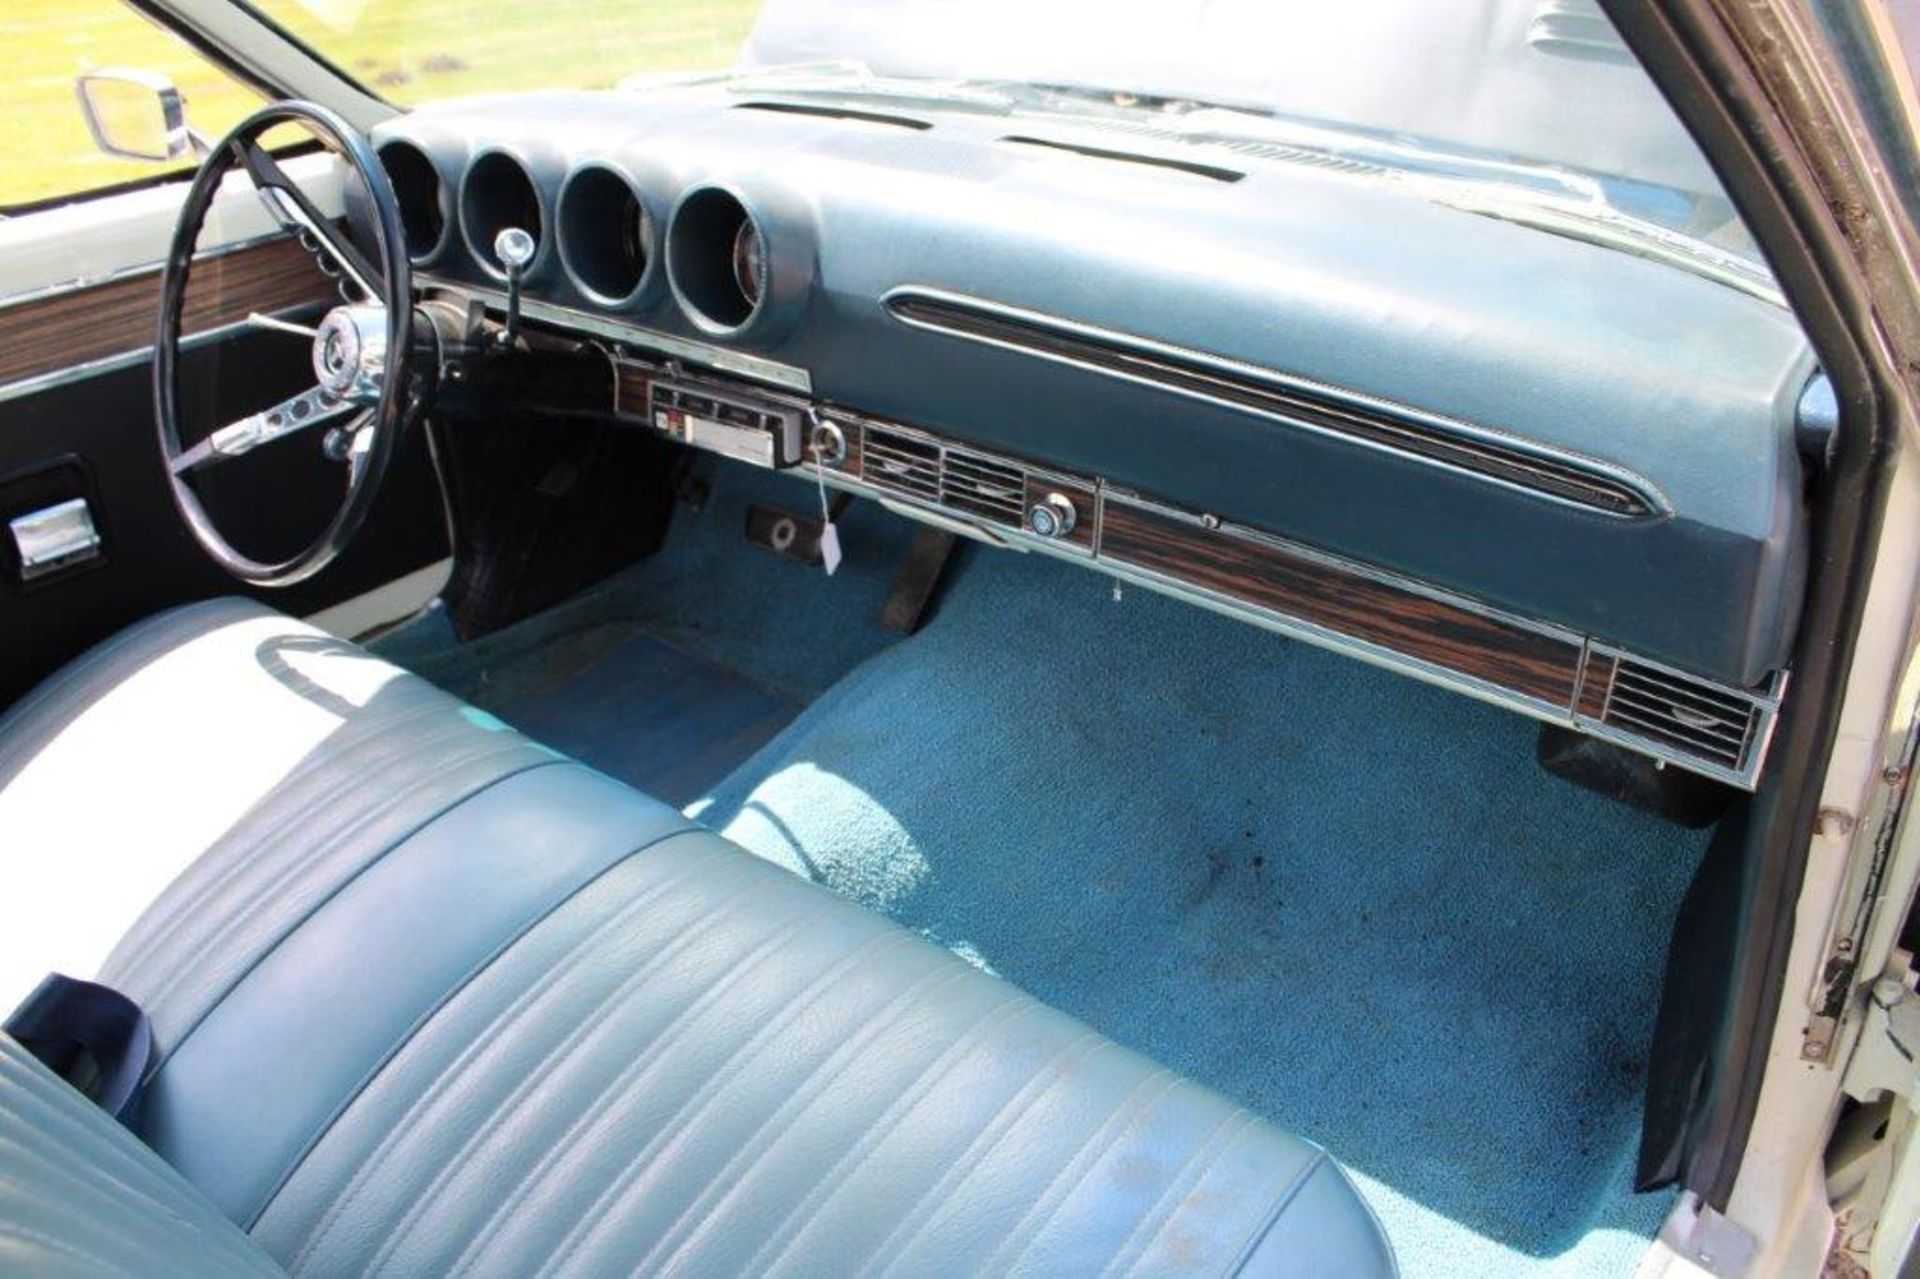 1969 Ford Ranchero 5.8 V8 Auto LHD - Image 12 of 25